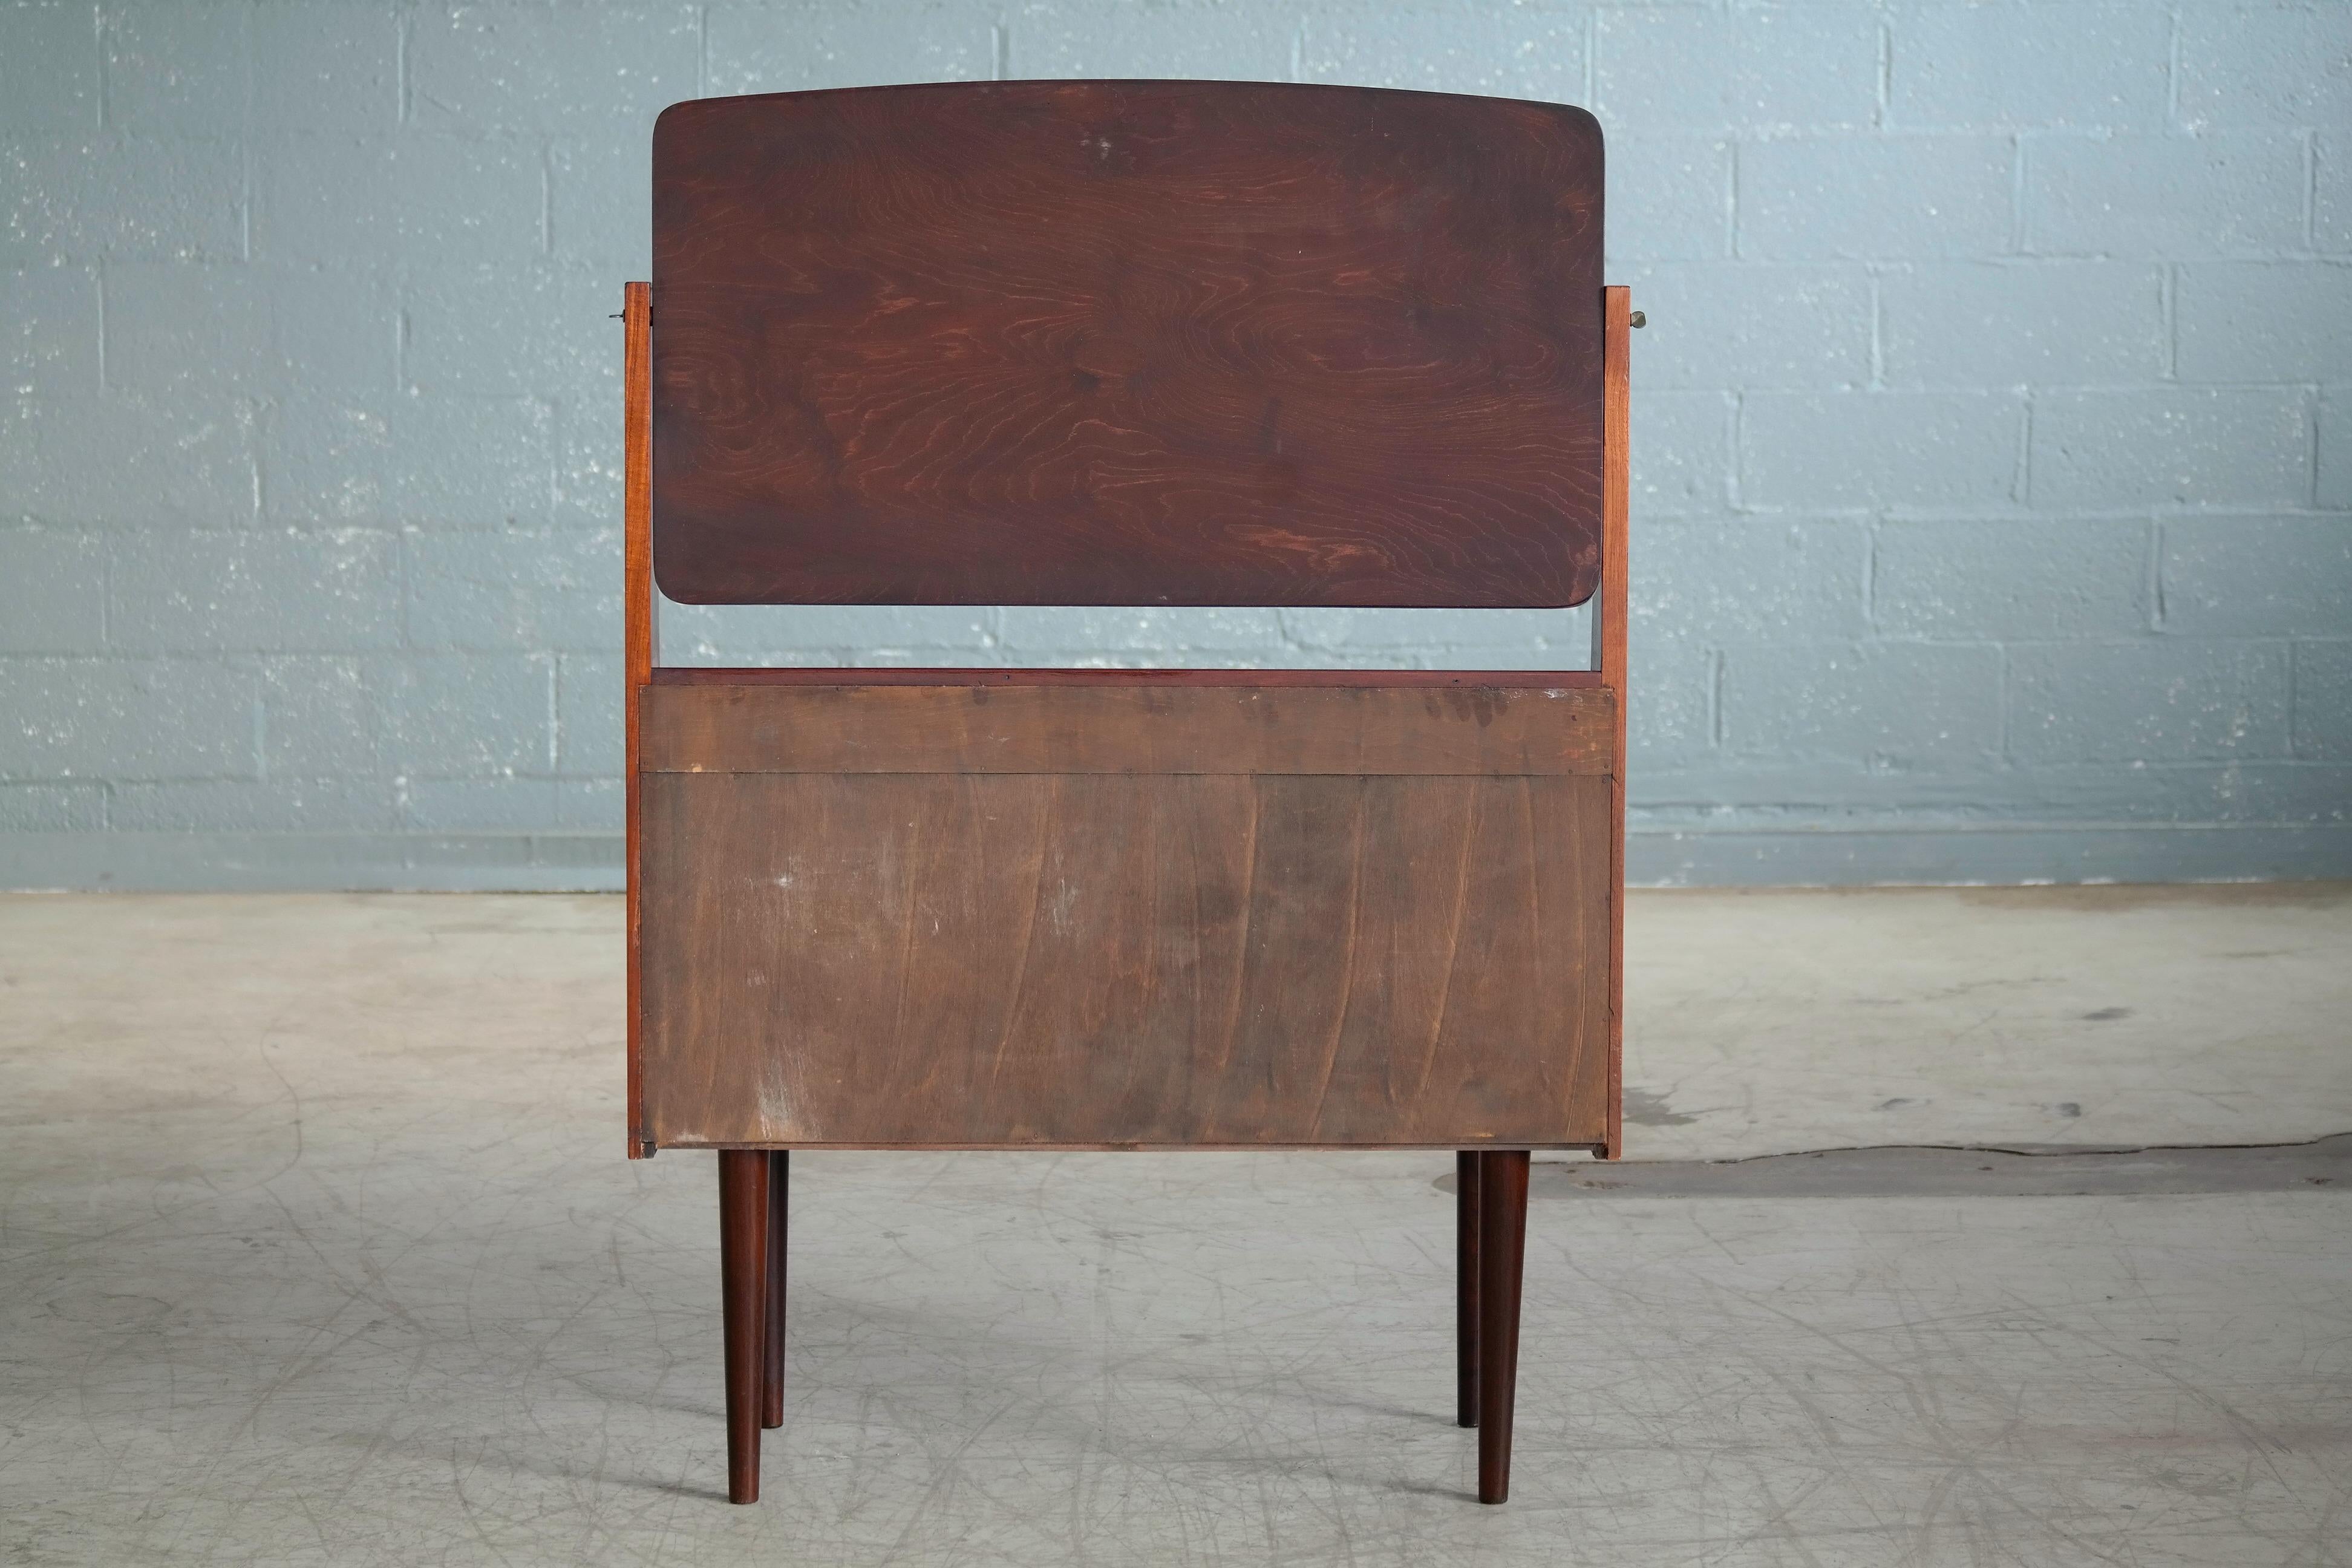 Danish Midcentury Vanity or Dressing Table in Rosewood with Mirror and Drawers (Rosenholz)